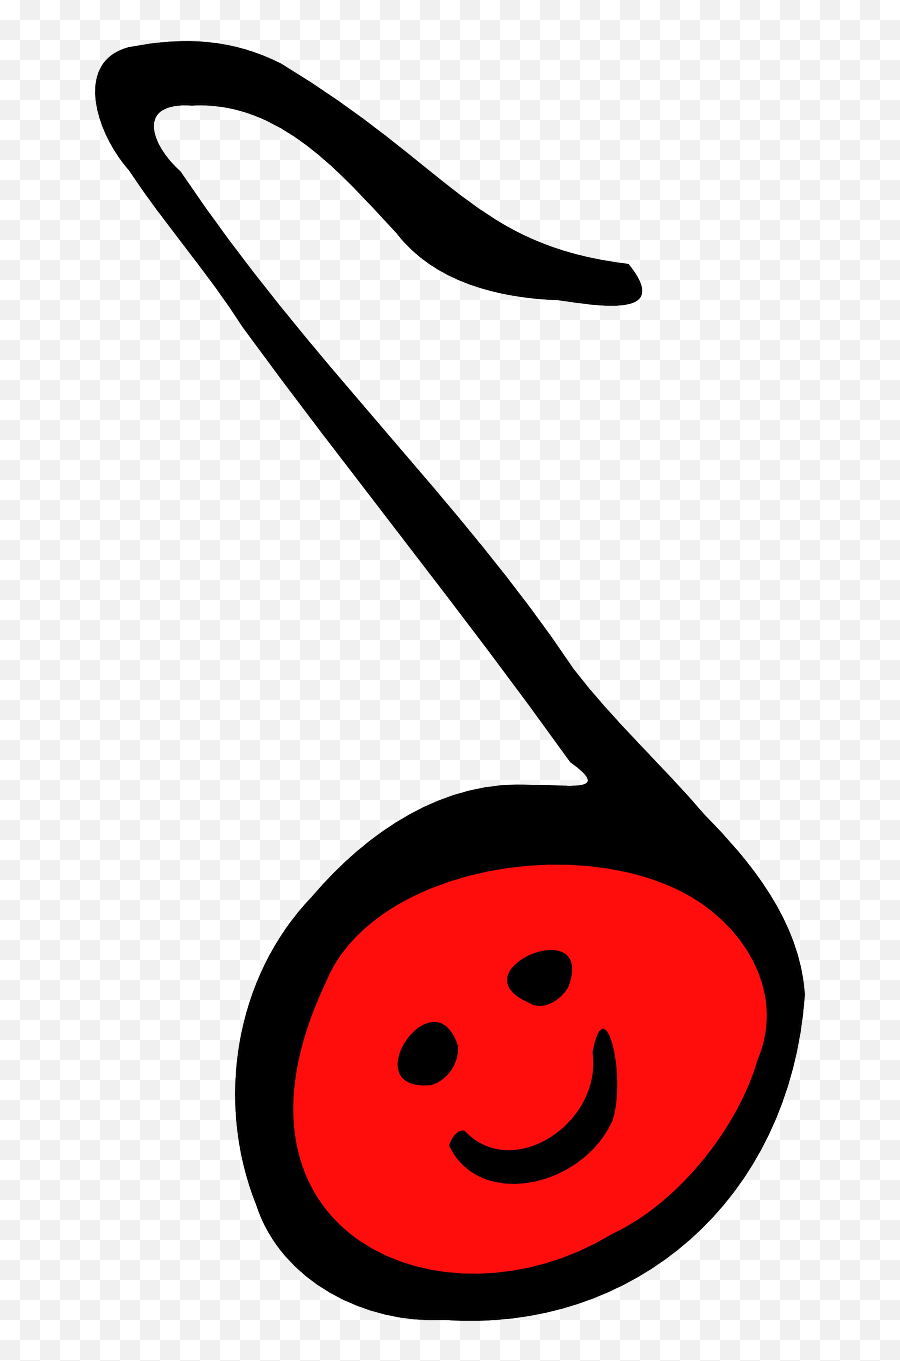 Music Note Melody Red Free Vector Graphics - Happy Music Note Emoji,Music Note Emoticon